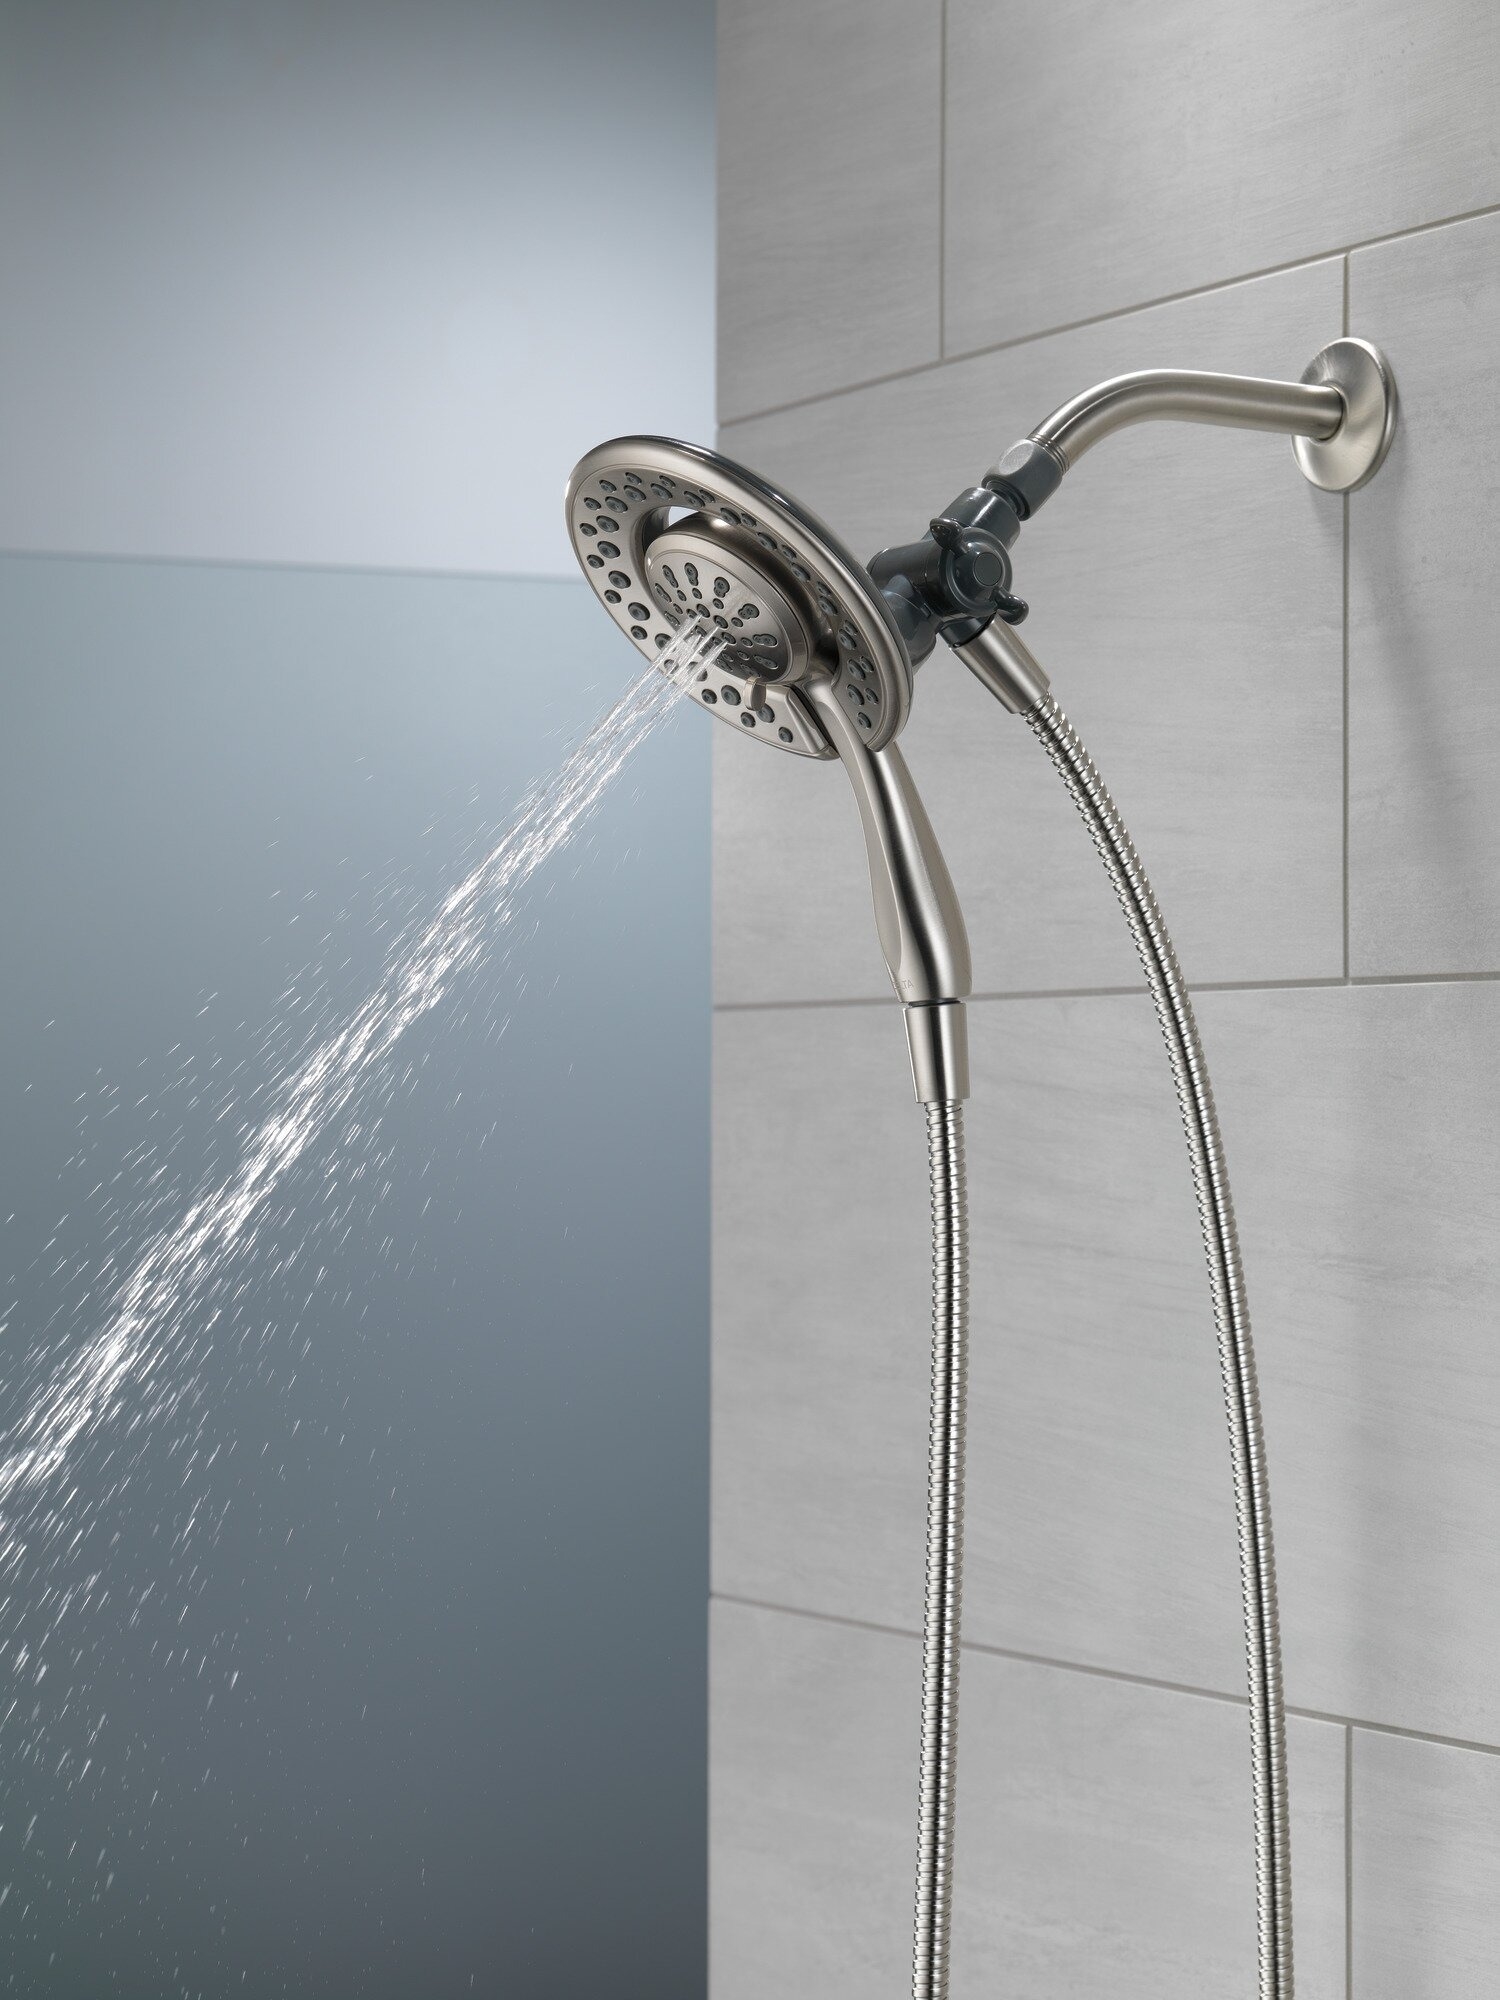 Showerhead with dual nozzles mounted in the shower